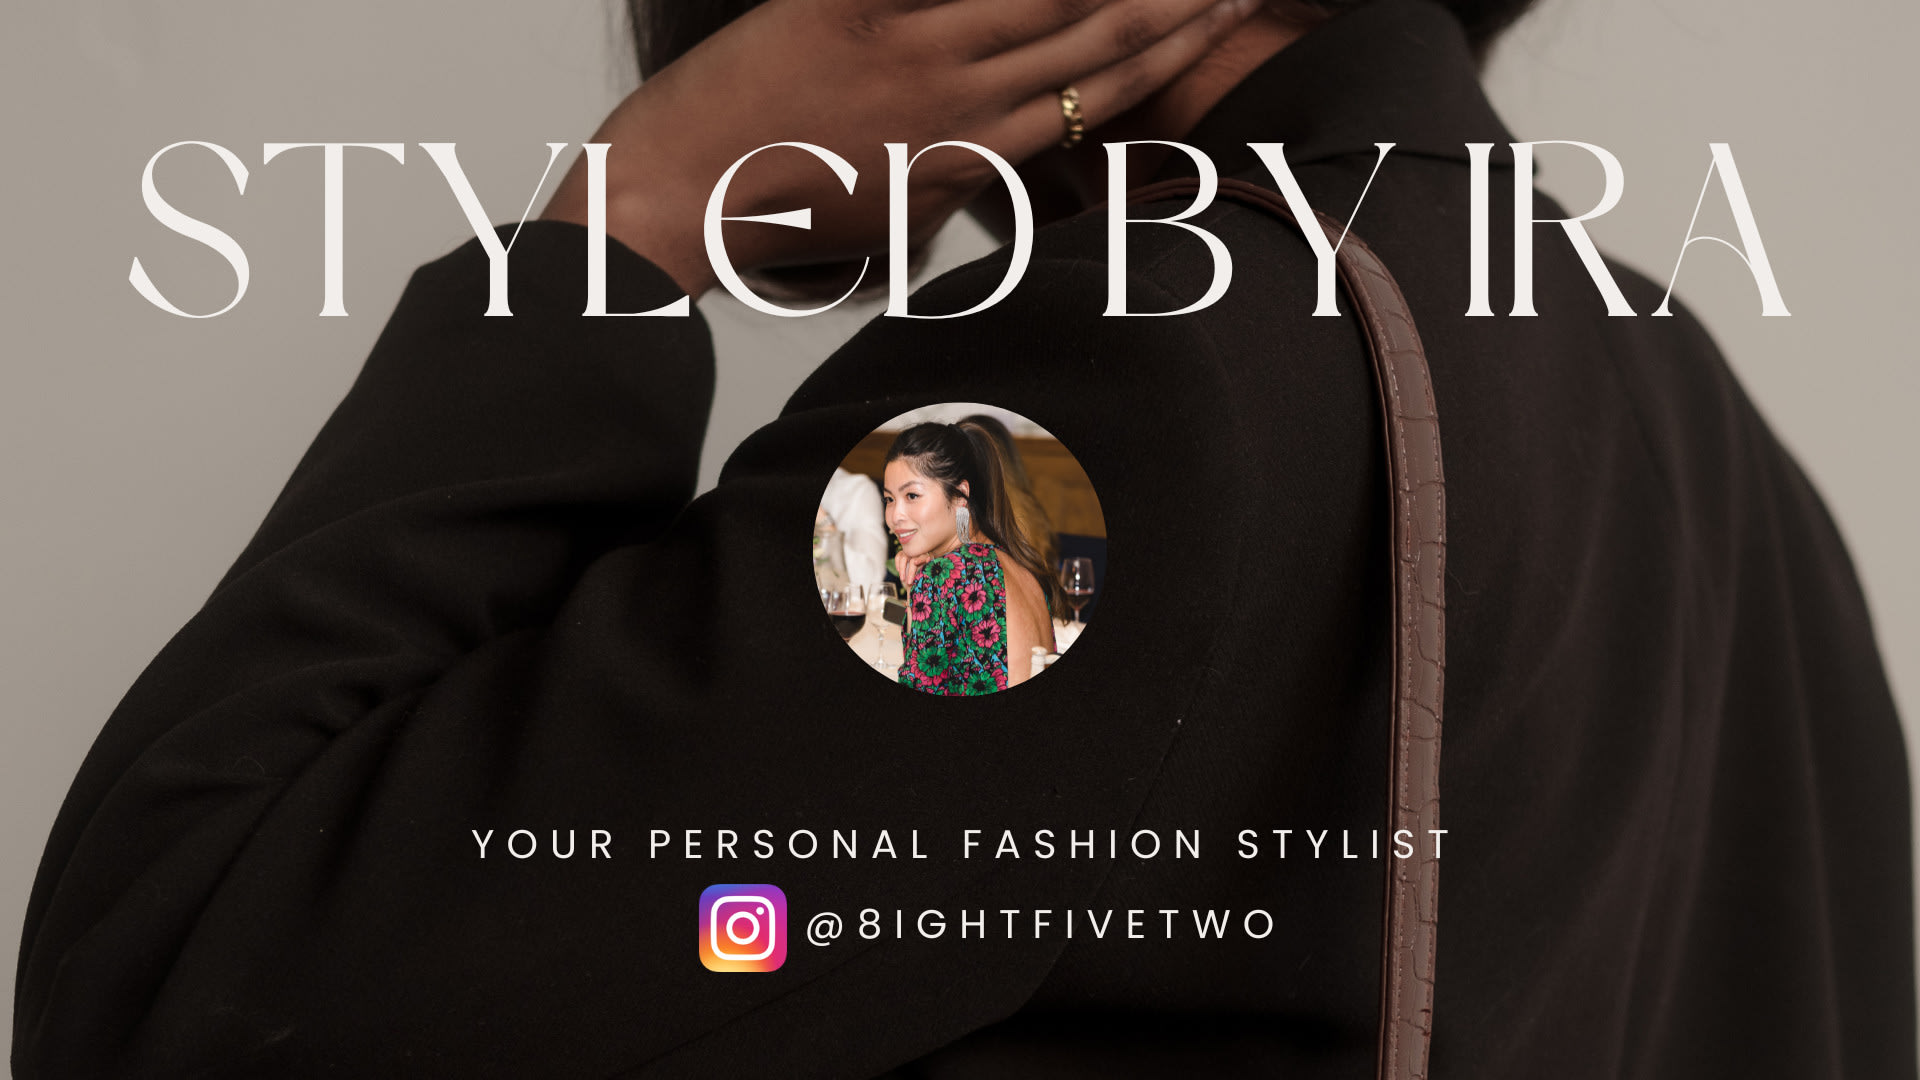 High-End Fashion & Personalized Styling